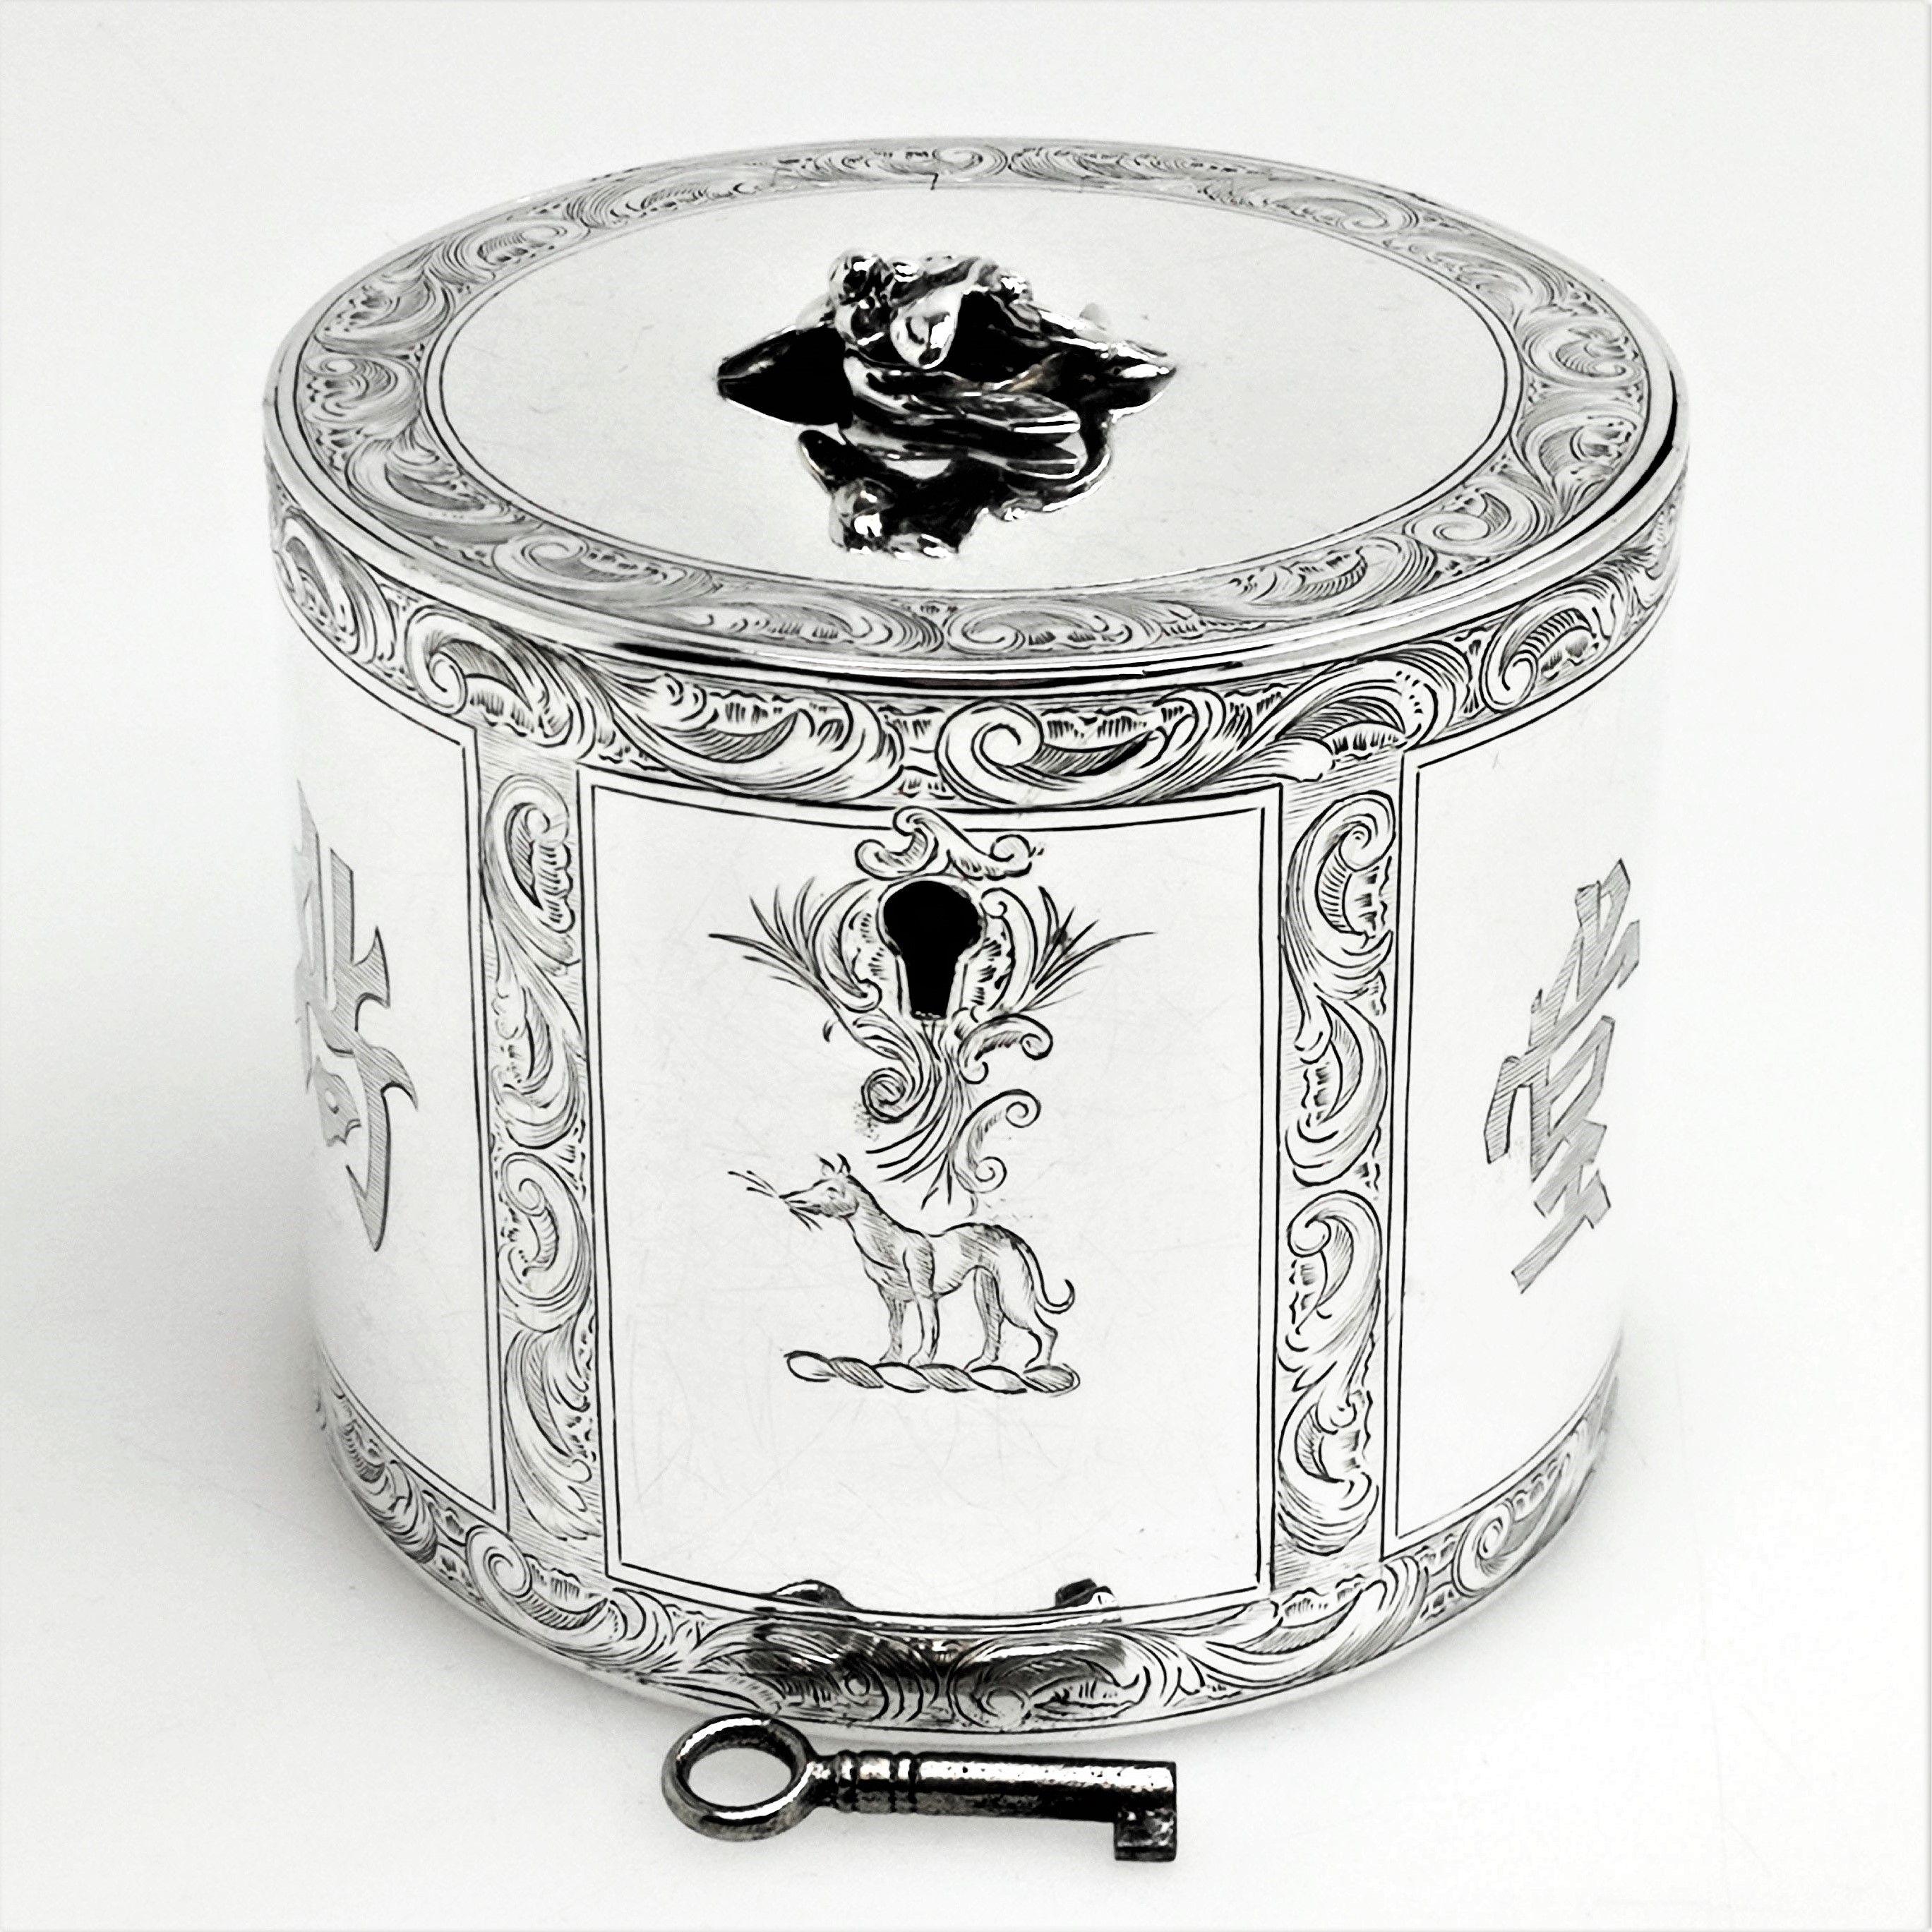 A beautiful Antique George III solid silver tea caddy. This caddy has a circular straight sided can shaped form and is decorated with beautiful and detailed engravings. These engravings form ornate scroll borders created panels on the sides. One of